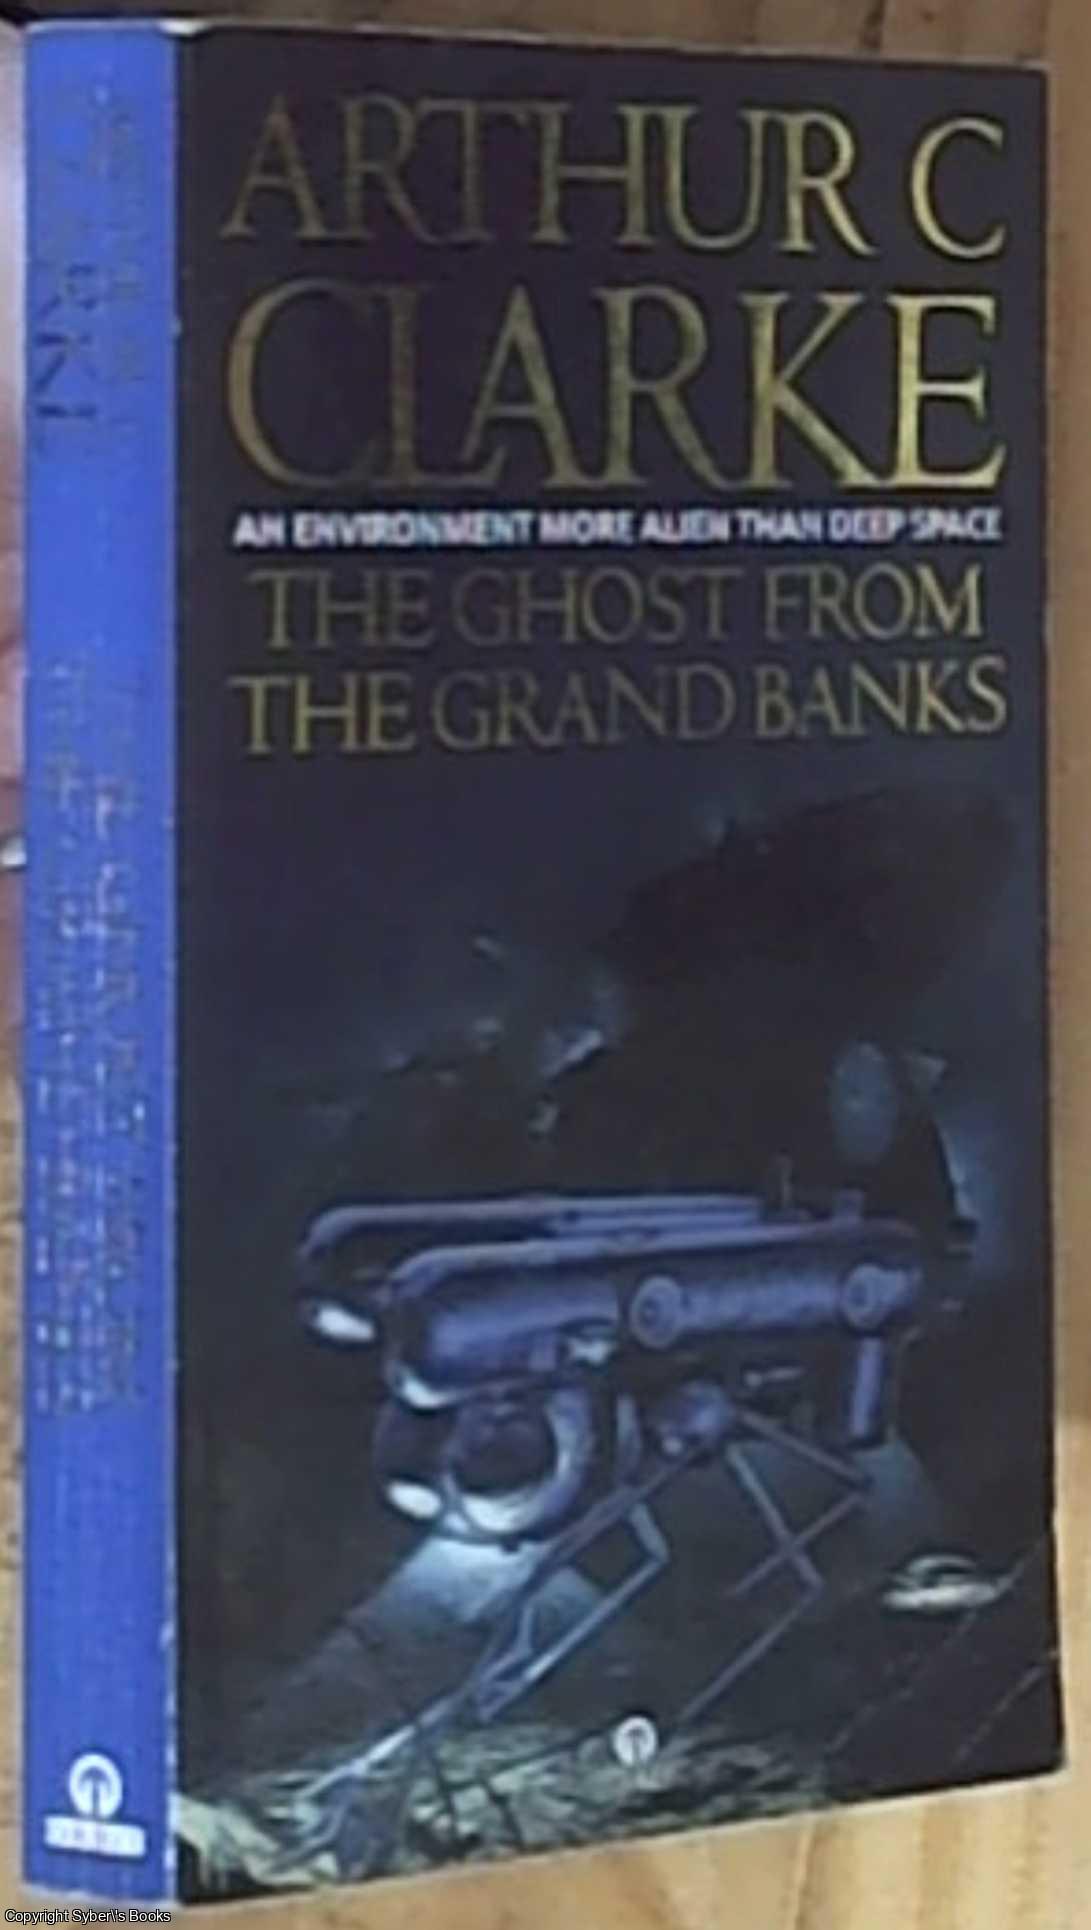 Clarke, Arthur C. & Lee, Gentry - The Ghost from Grand Banks